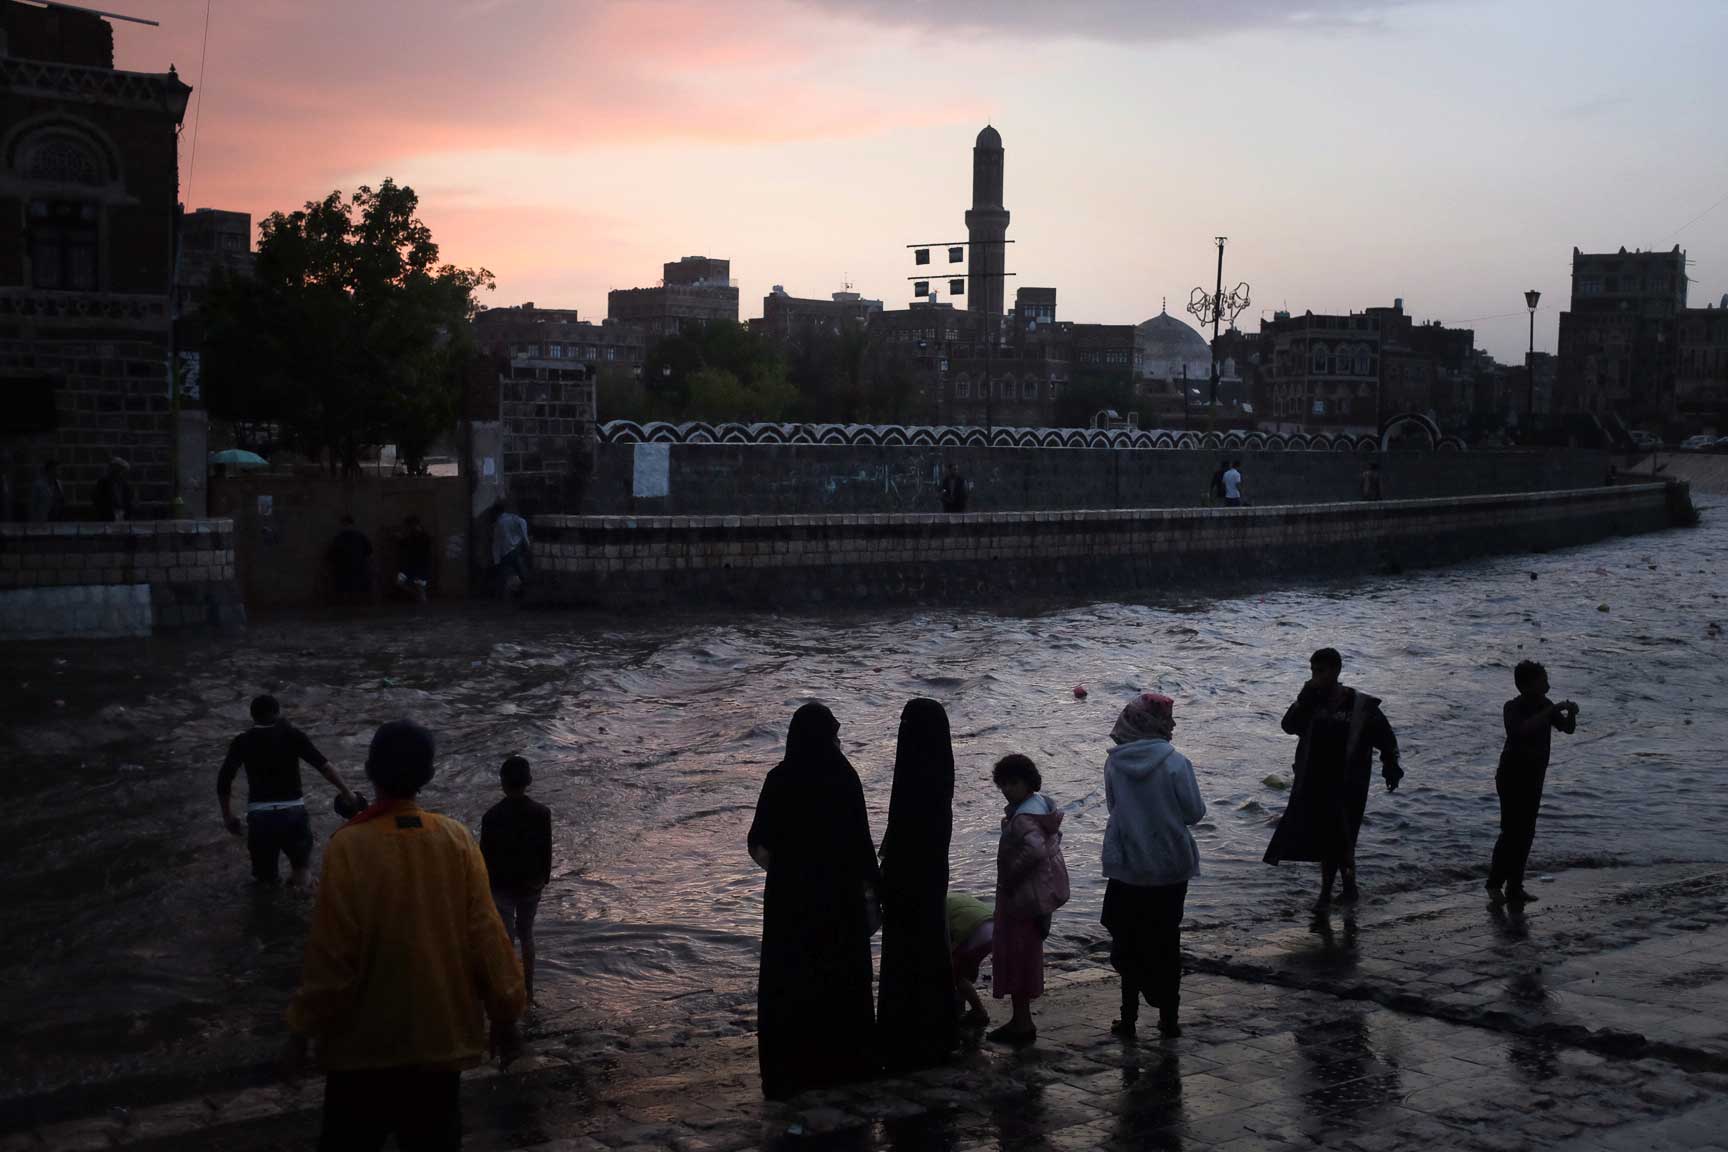 Yemeni children play in the Silah drainage road after heavy rains on August 6, 2015 in Sana'a, Yemen.